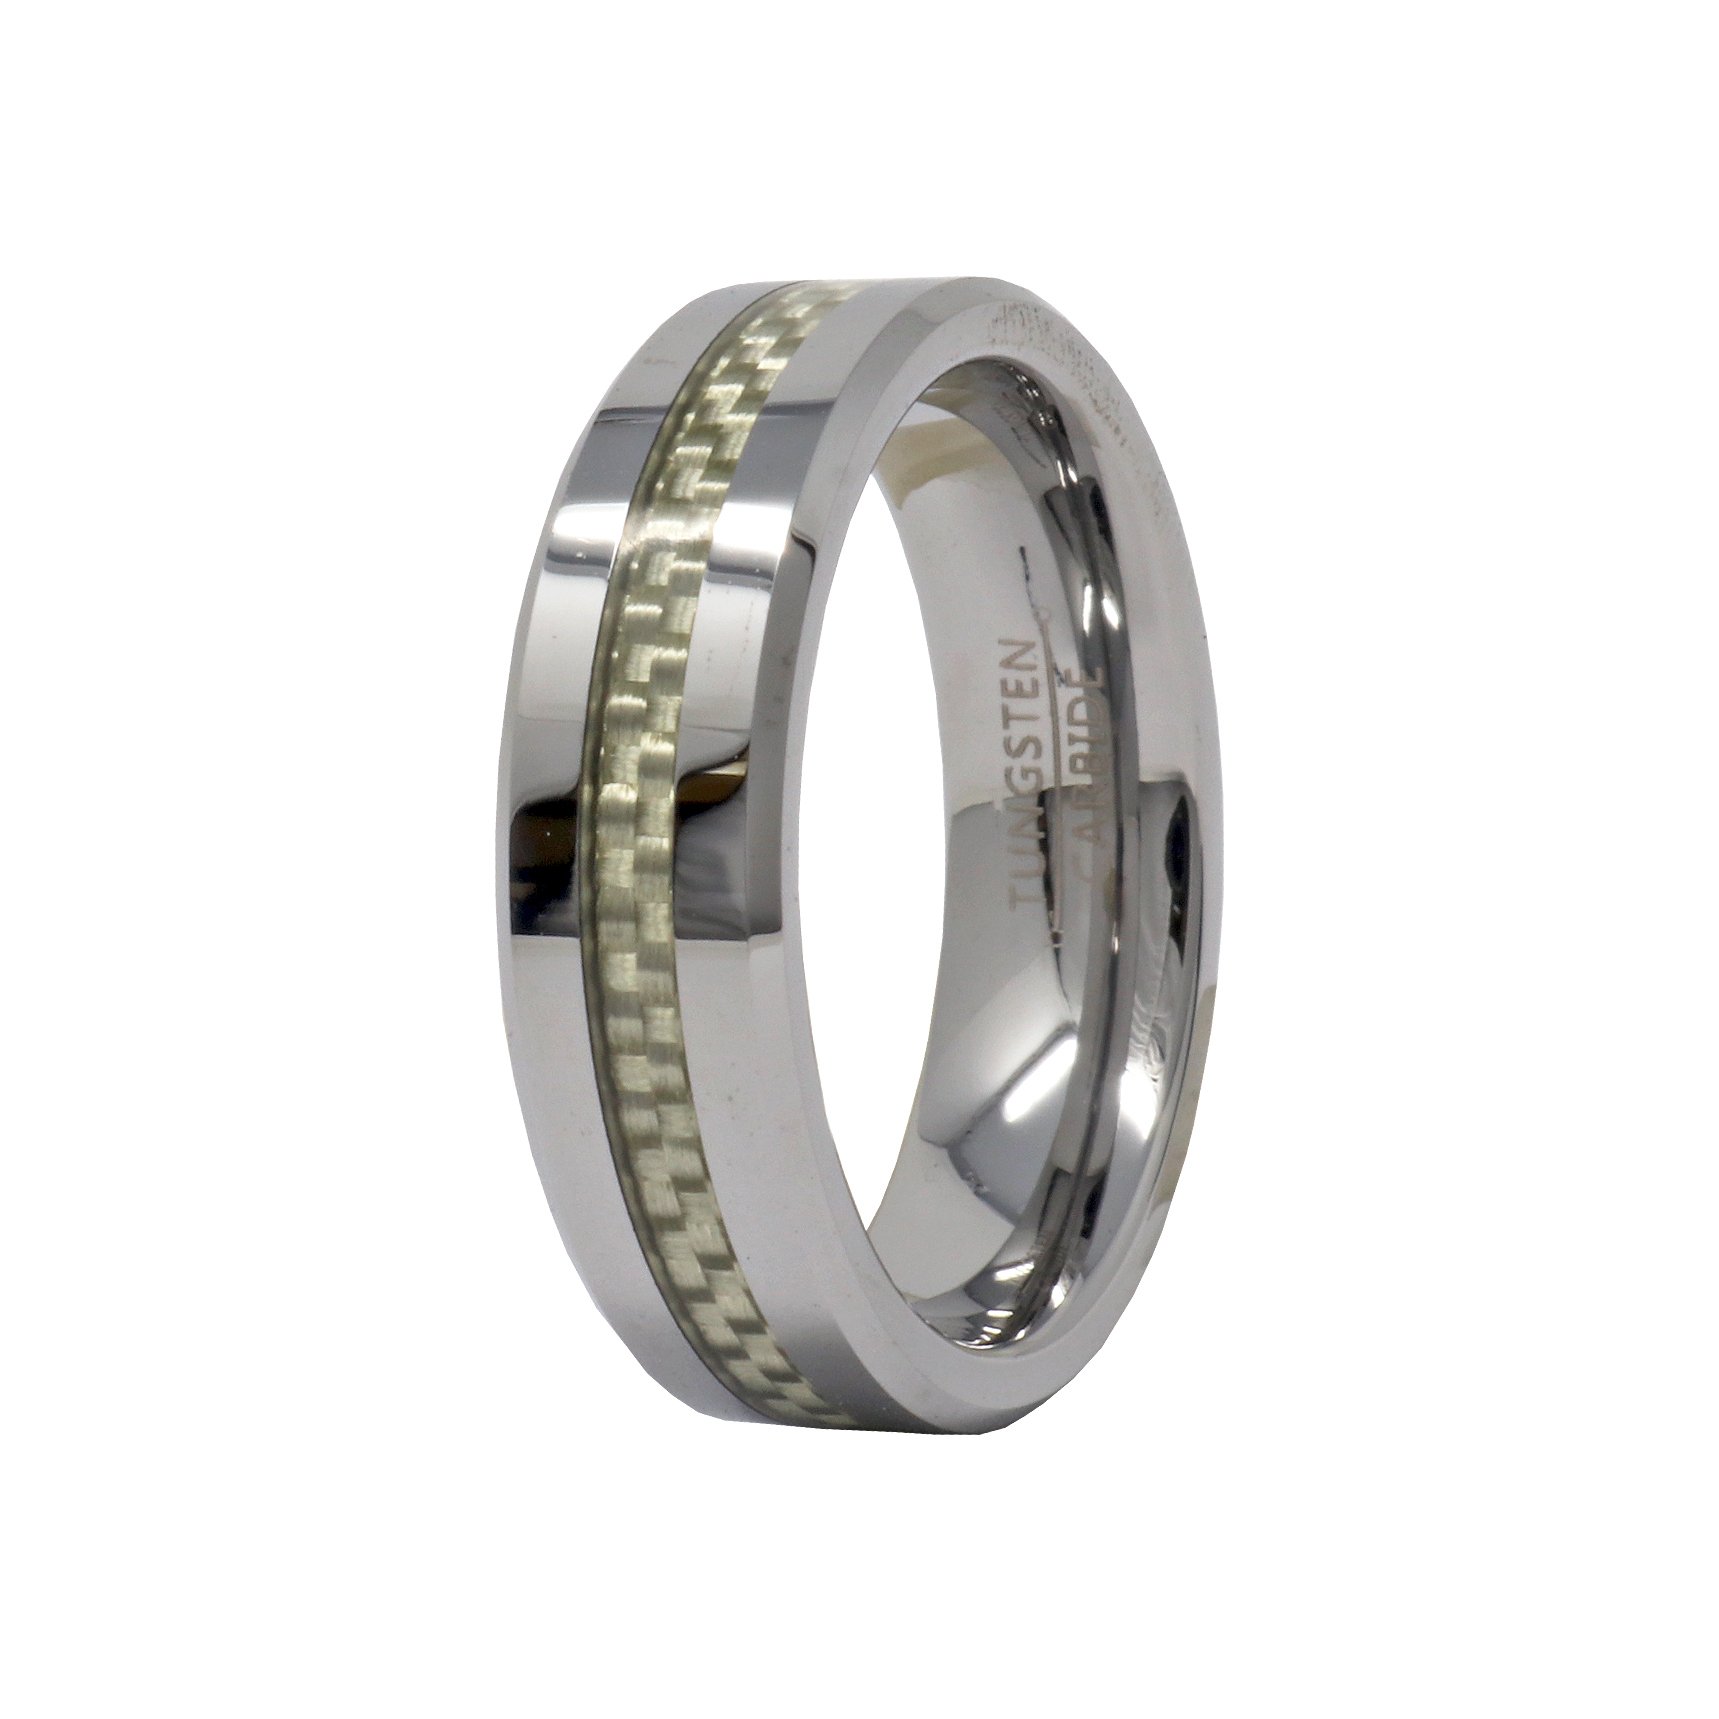 Tungsten Ring Size 12 - 6mm Gray Carbon Fiber Inlay